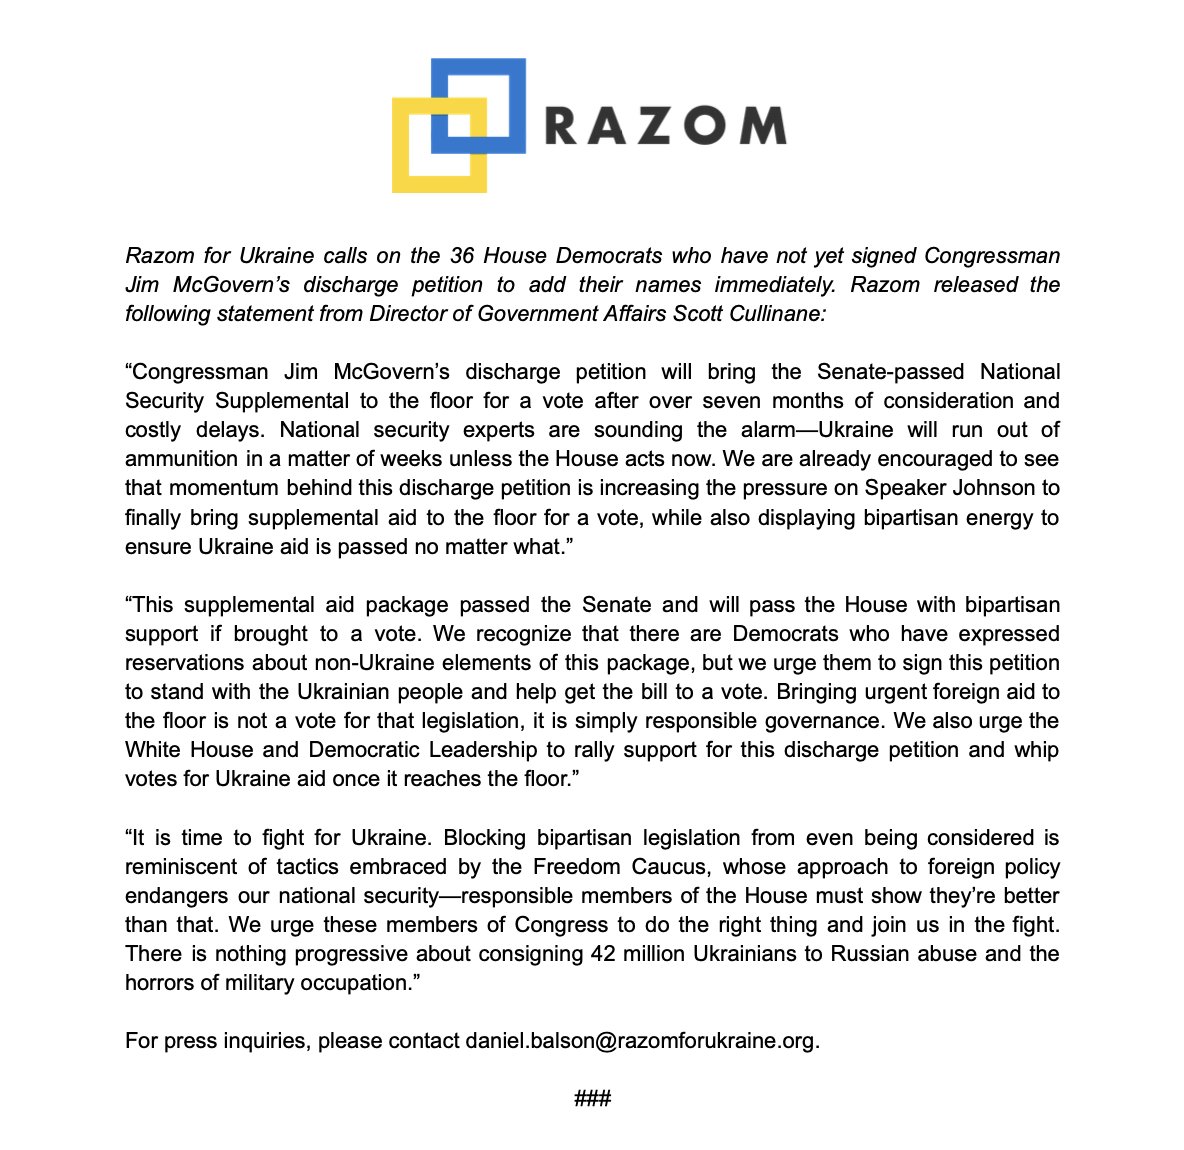 Razom for Ukraine calls on the 36 House Democrats who have yet to sign @RepMcGovern's discharge petition to add their names immediately. There's nothing progressive about consigning 42 million Ukrainians to the horrors of Russian occupation. The time to fight for Ukraine is now.